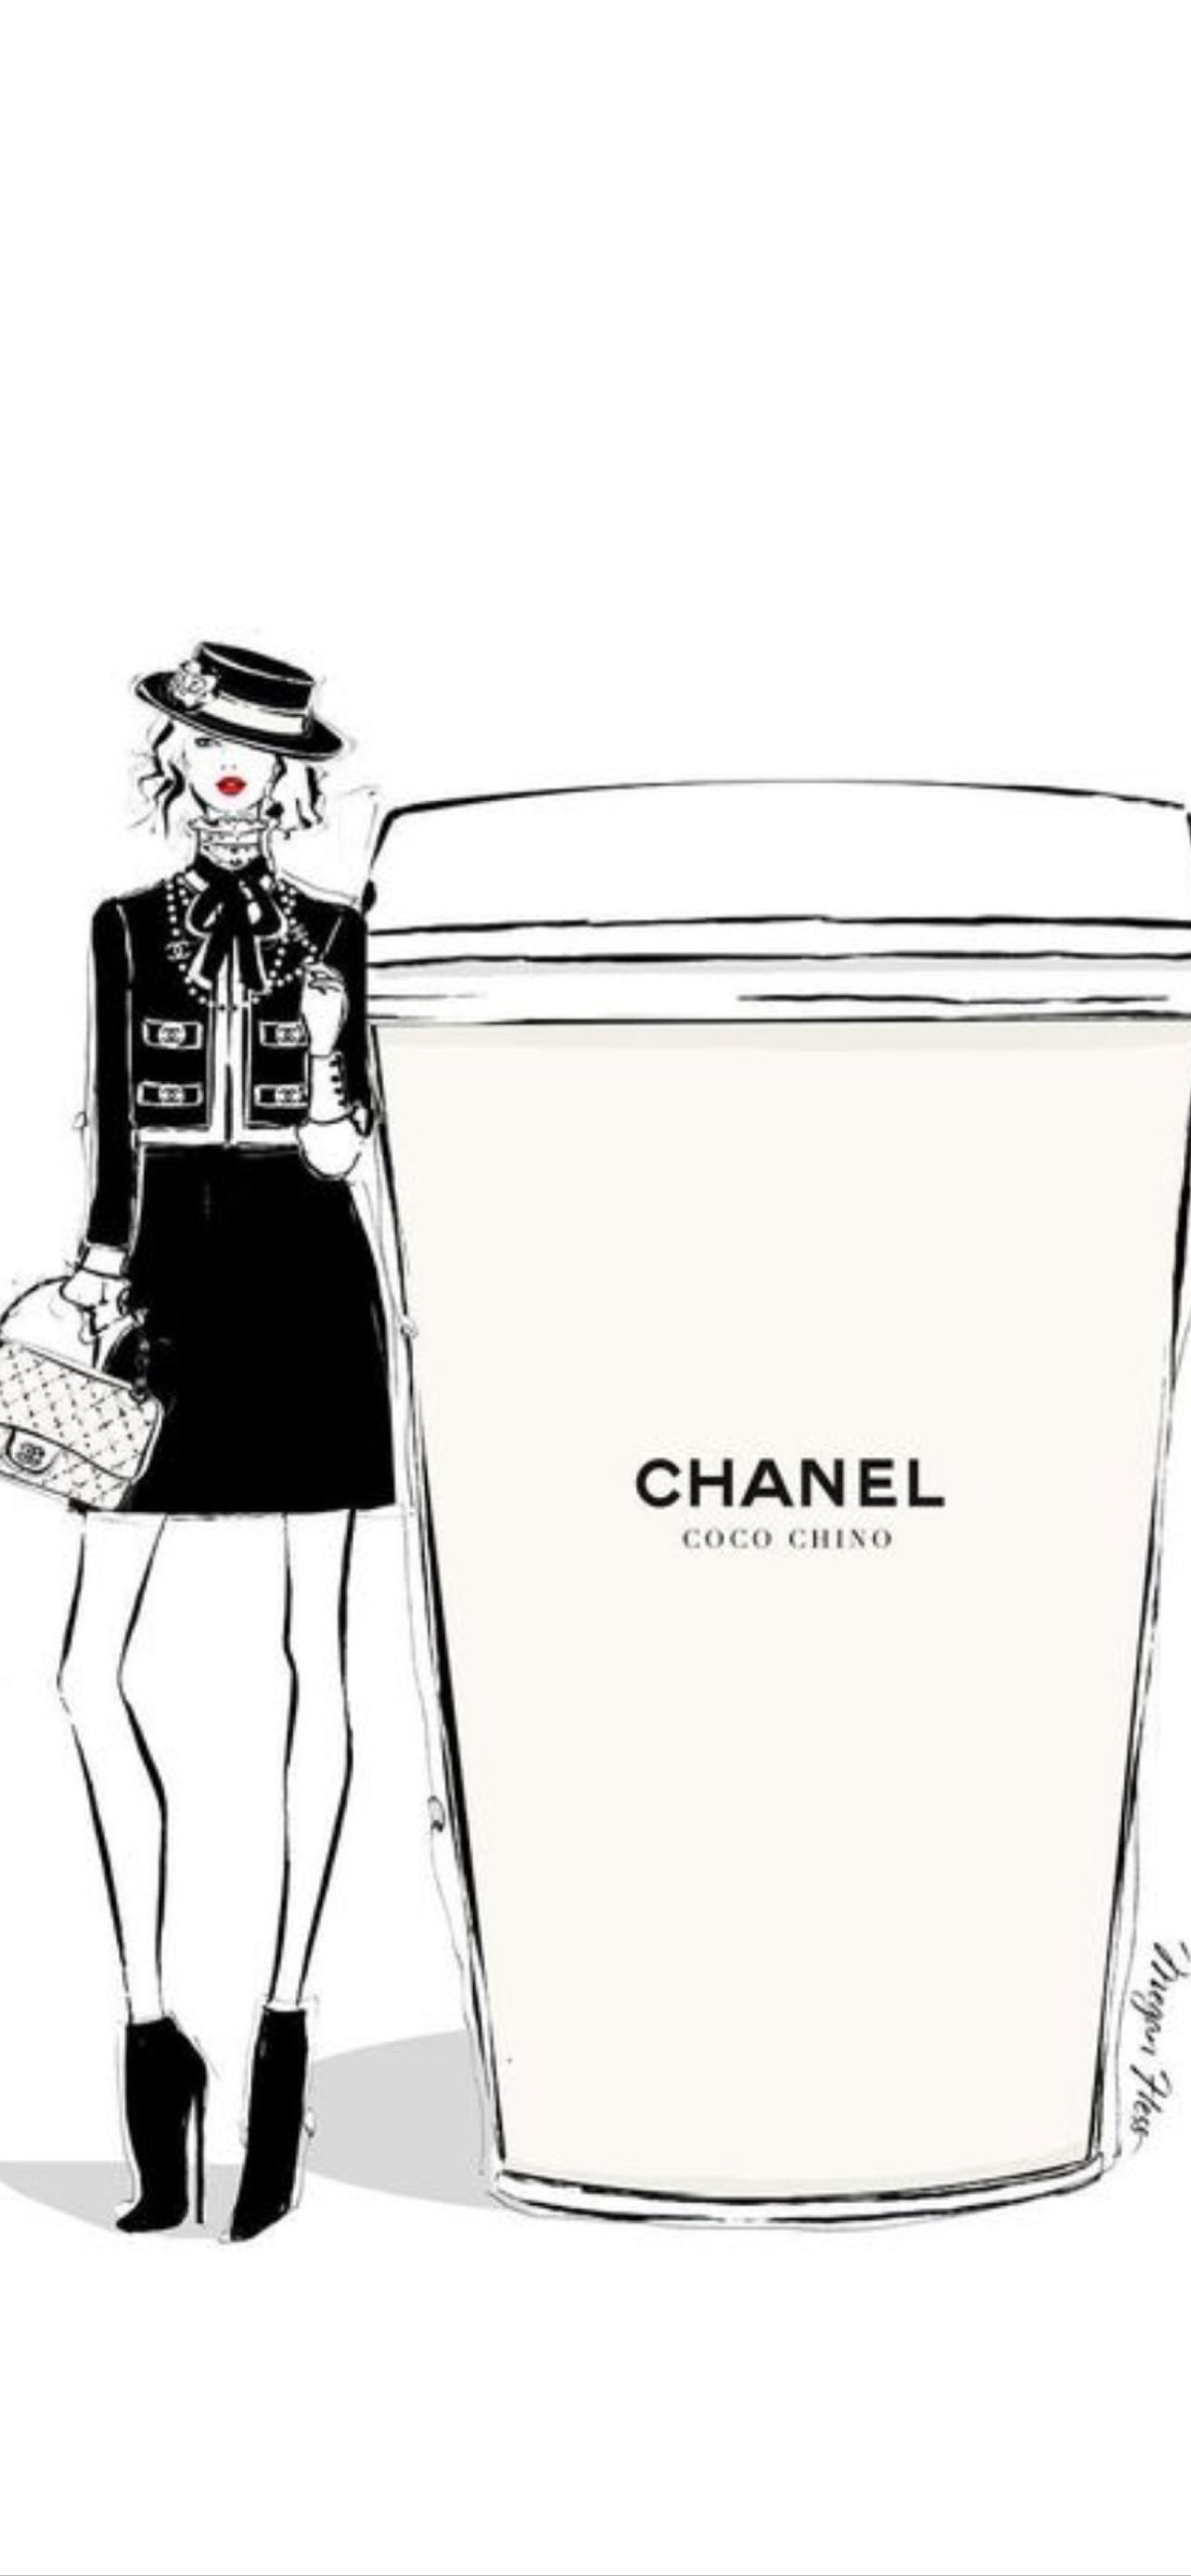 Chanel Wallpapers Backgrounds free download